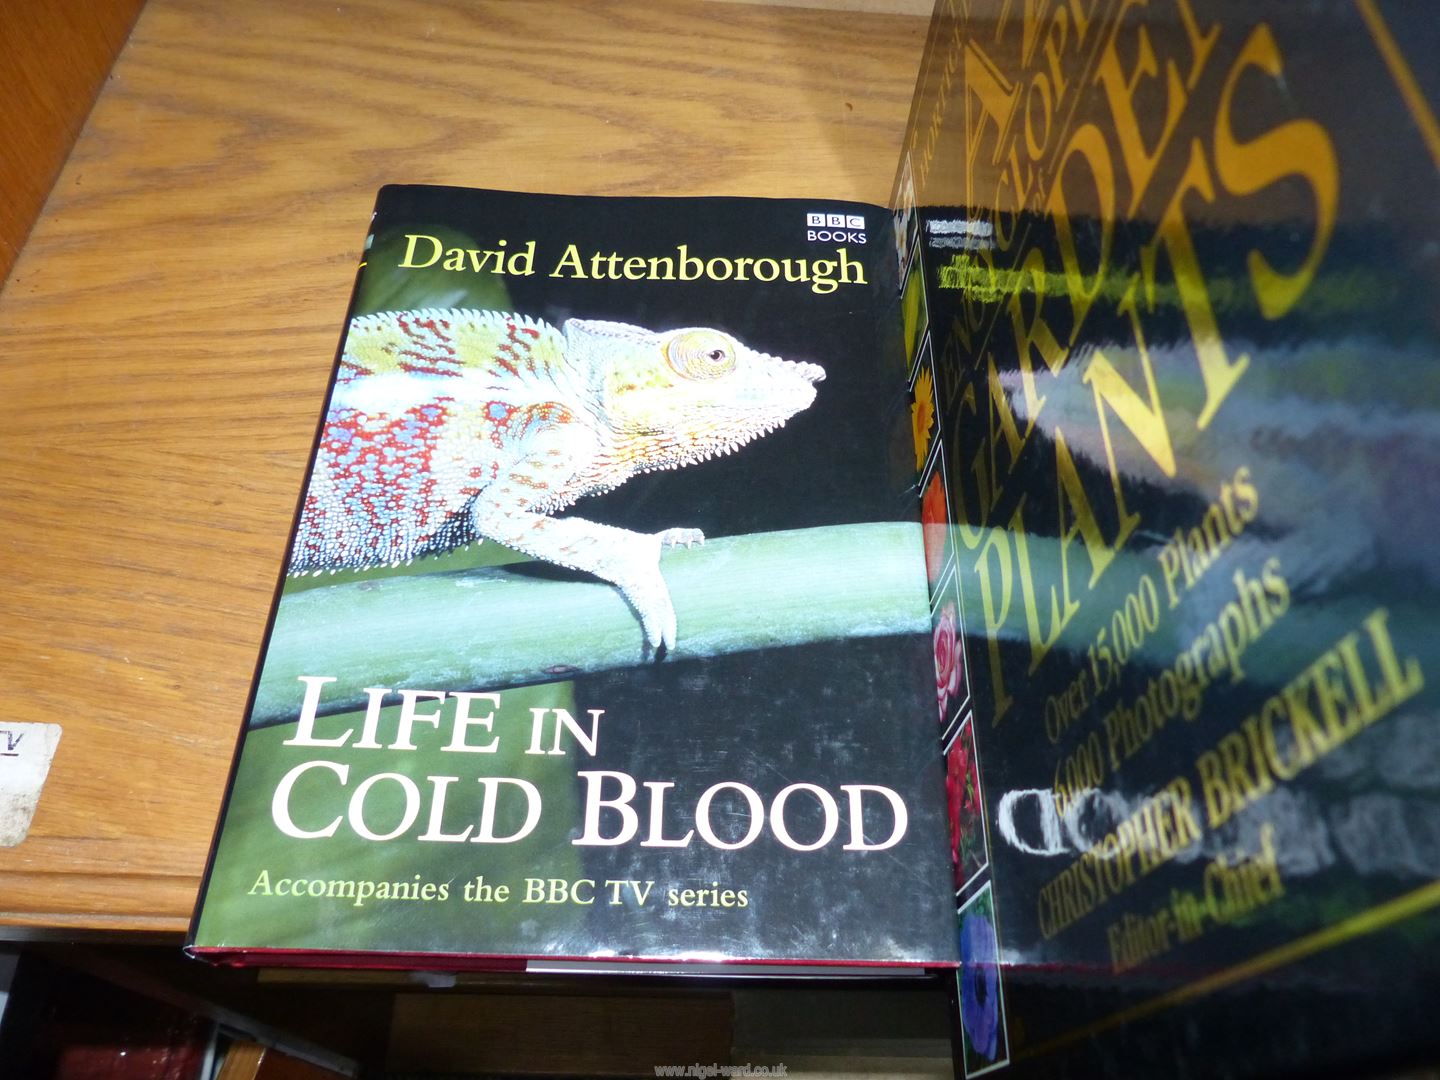 Three books A-Z Encyclopedia of Garden Plants, David Attenborough Life in Cold Blood etc. - Image 2 of 4